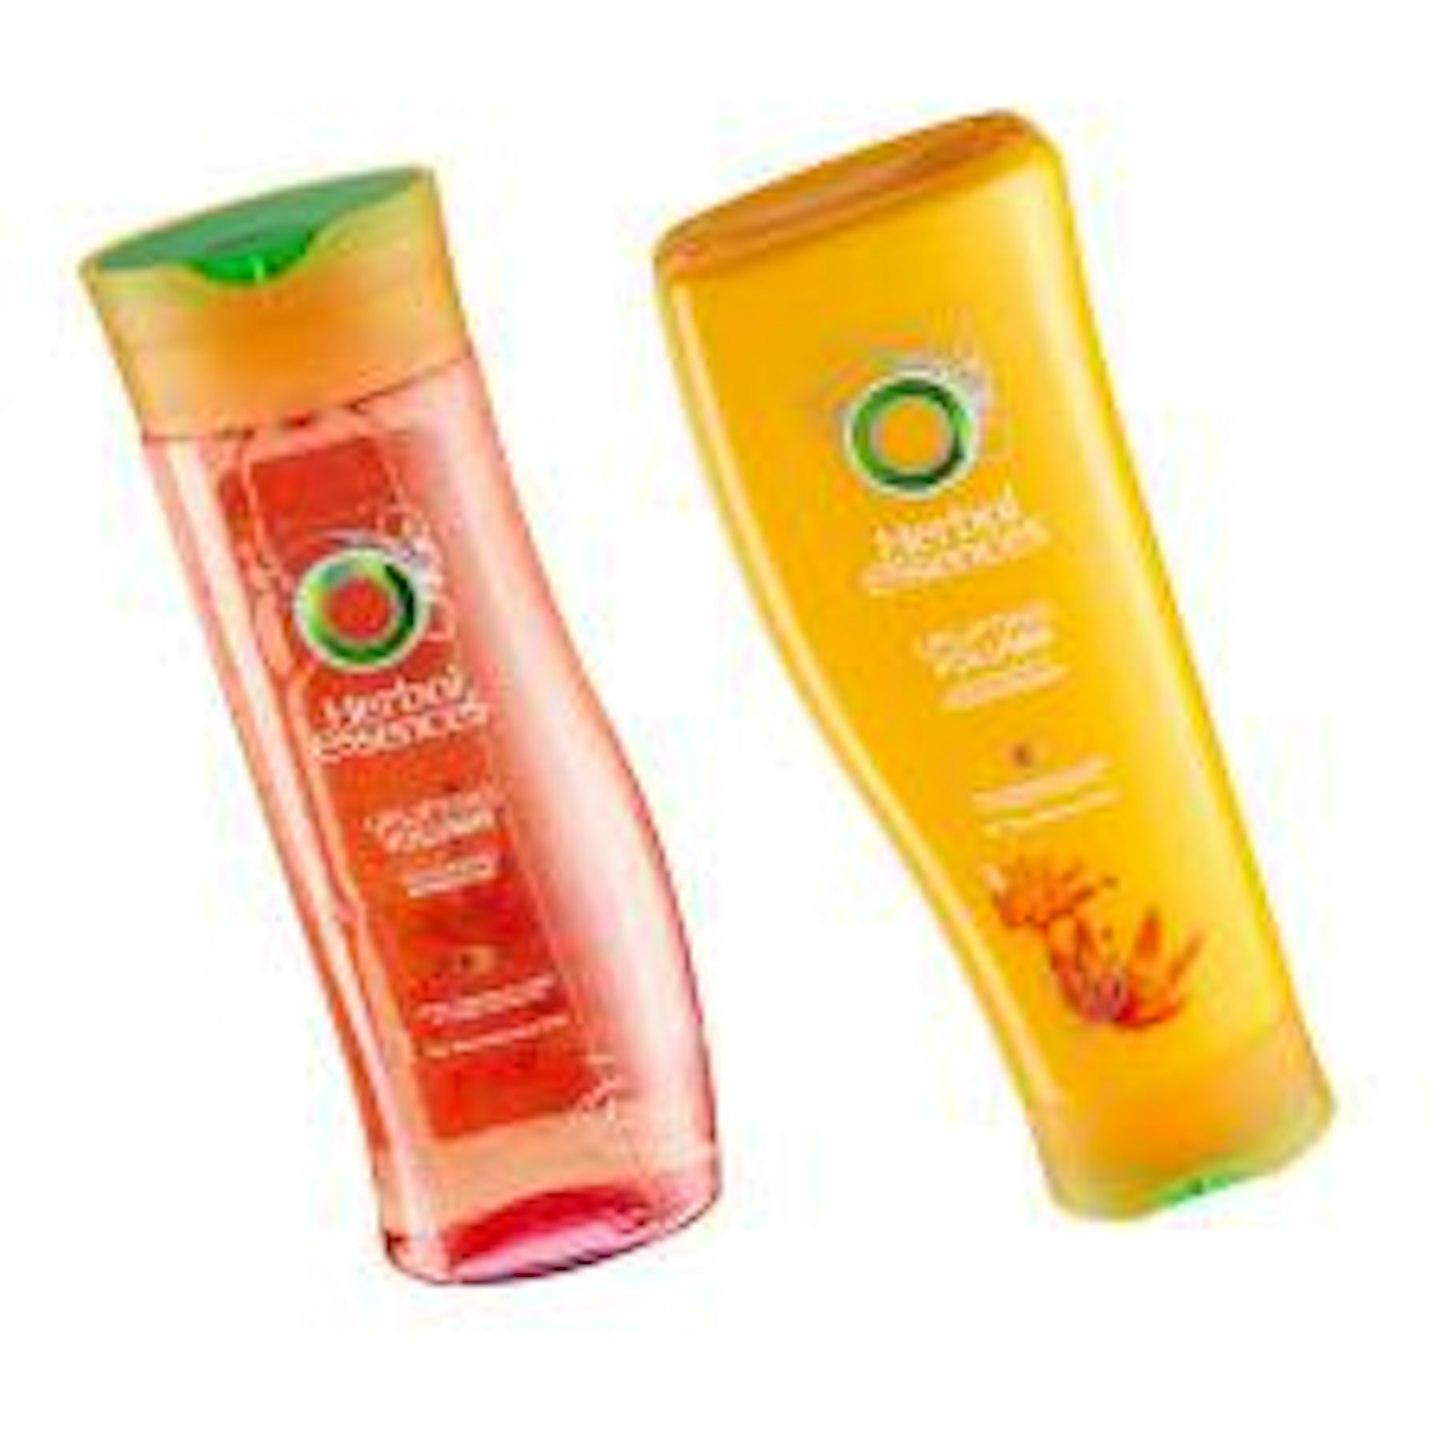 Herbal Essences Uplifting Shampoo and Conditioner 2.04 each